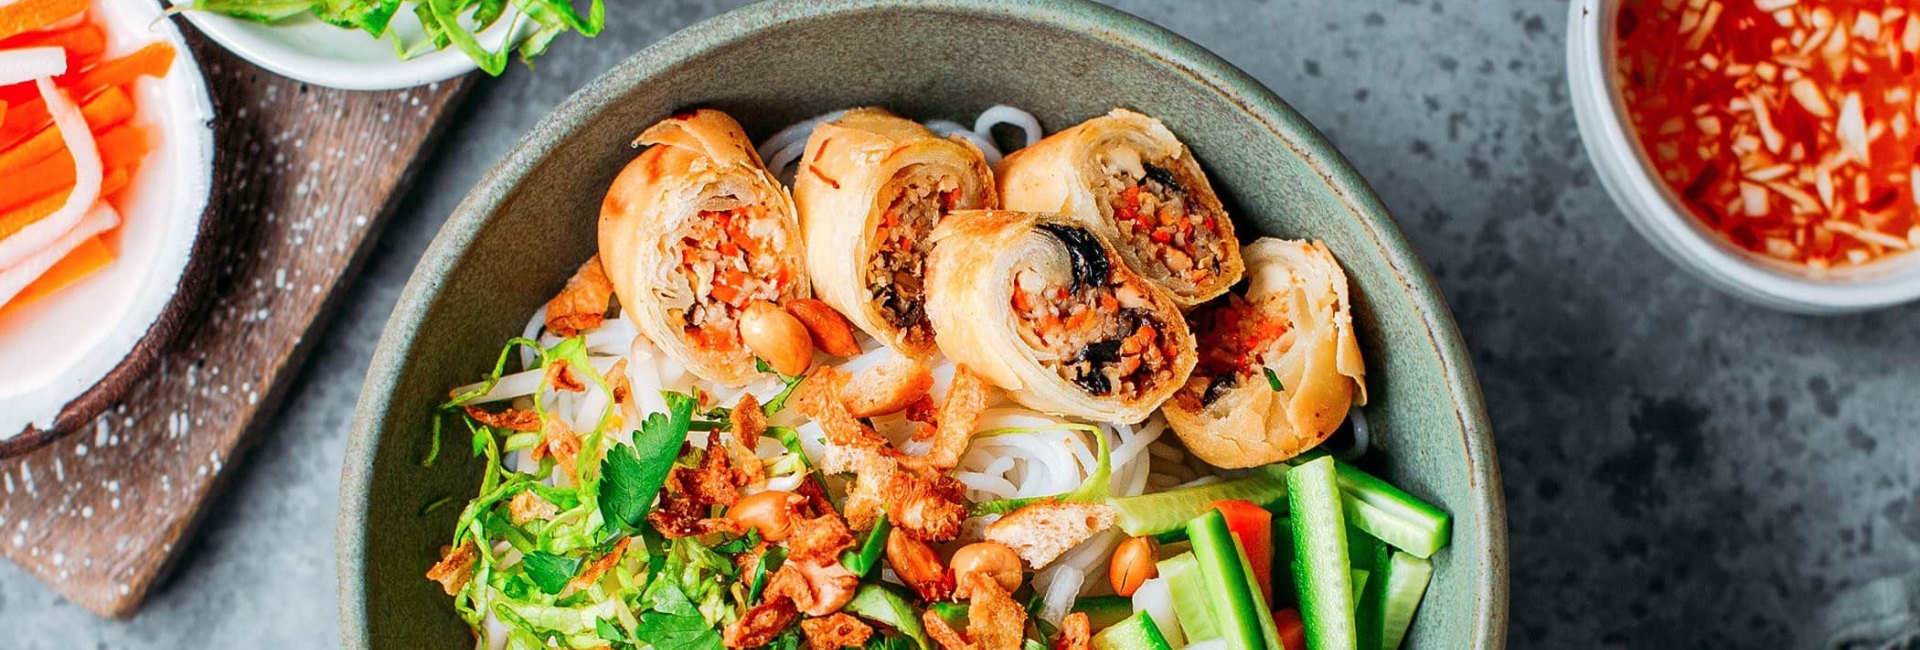 Top 15 Best Vegetarian Food to Try During Your Family Tour of Vietnam and Cambodia